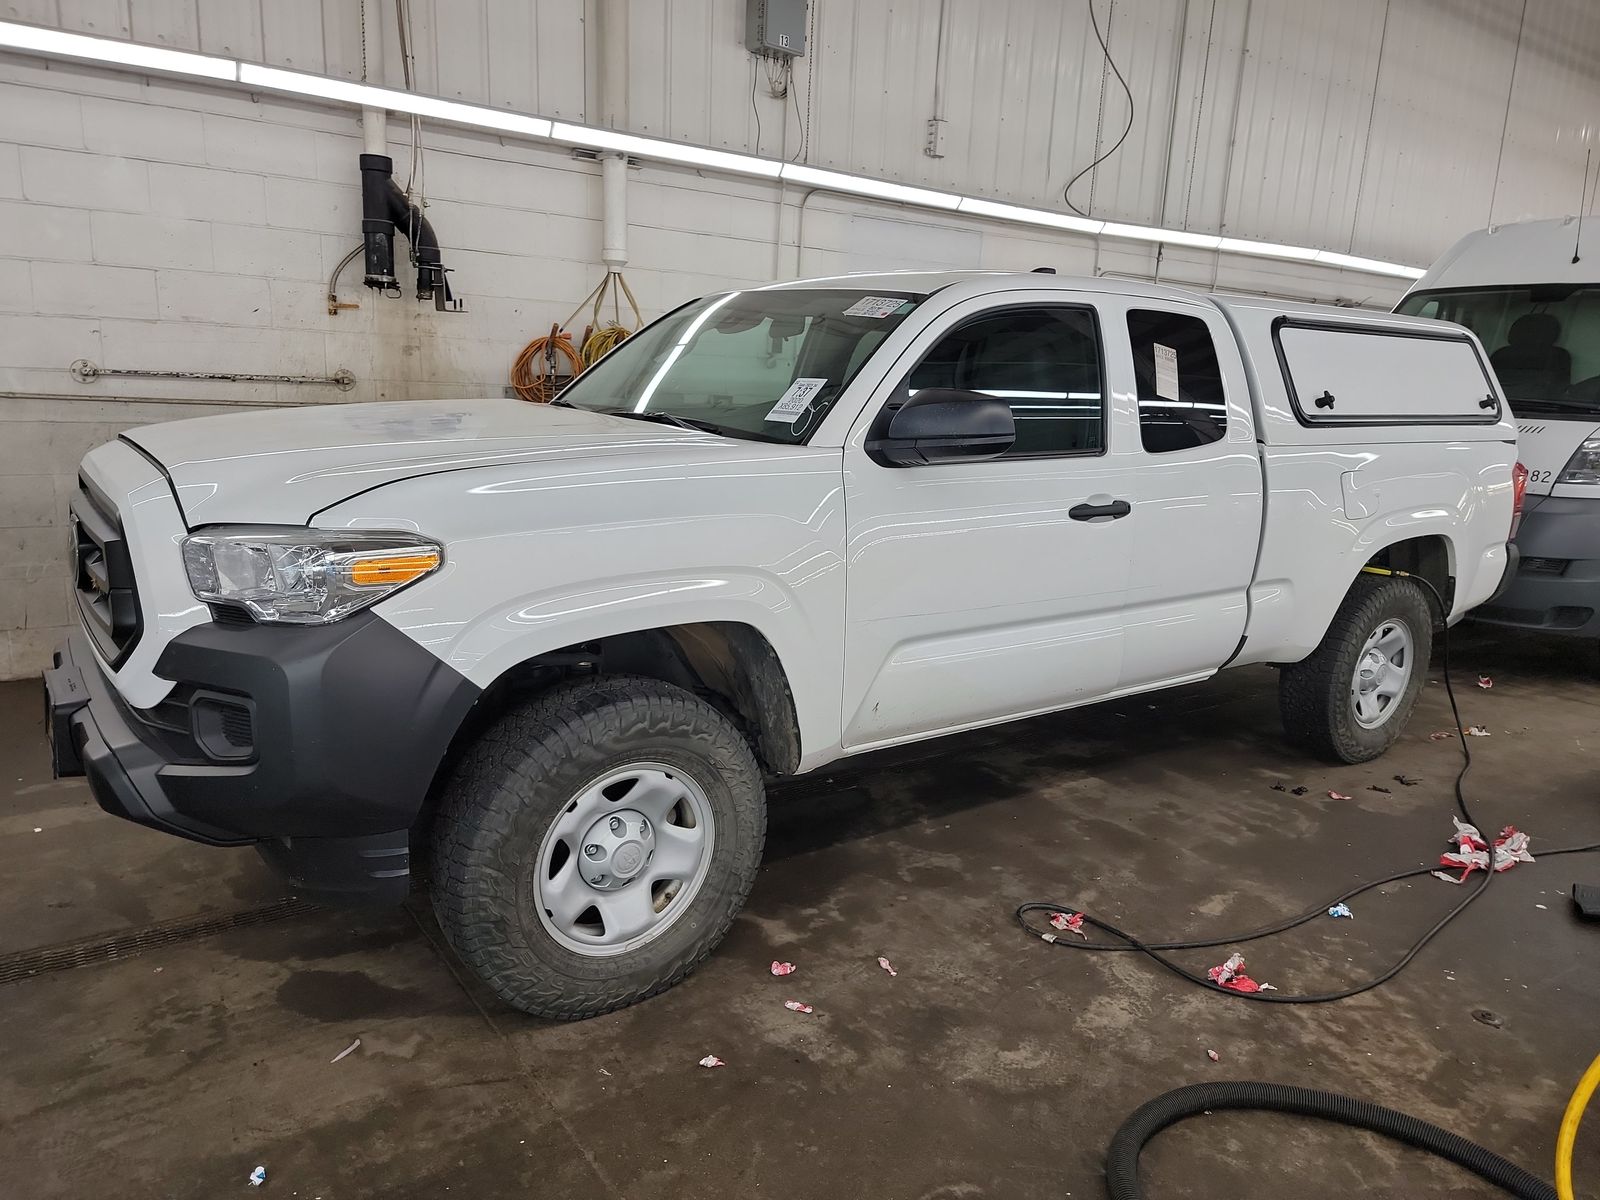 Used 2020 Toyota Tacoma SR with VIN 5TFRX5GN8LX175643 for sale in Minneapolis, Minnesota